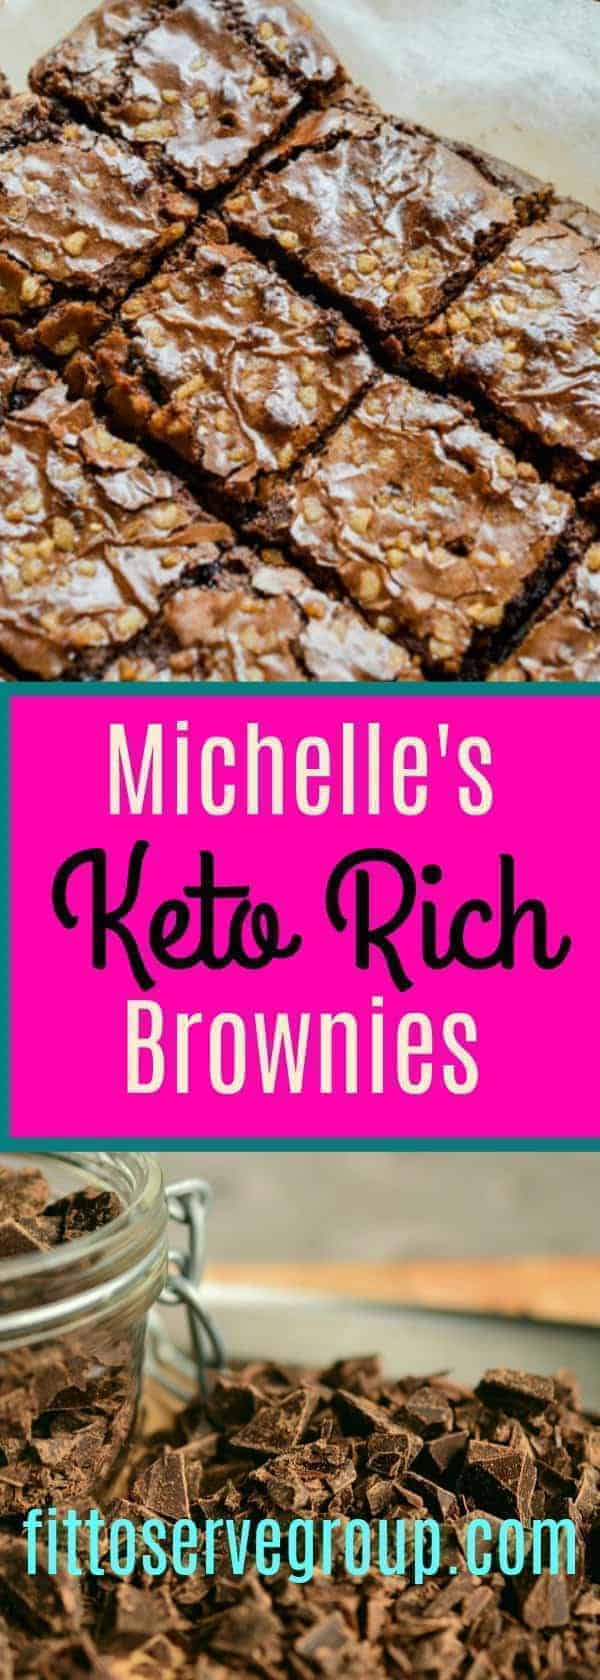 Michelle's Rich Keto Brownies (The richest low carb brownie)